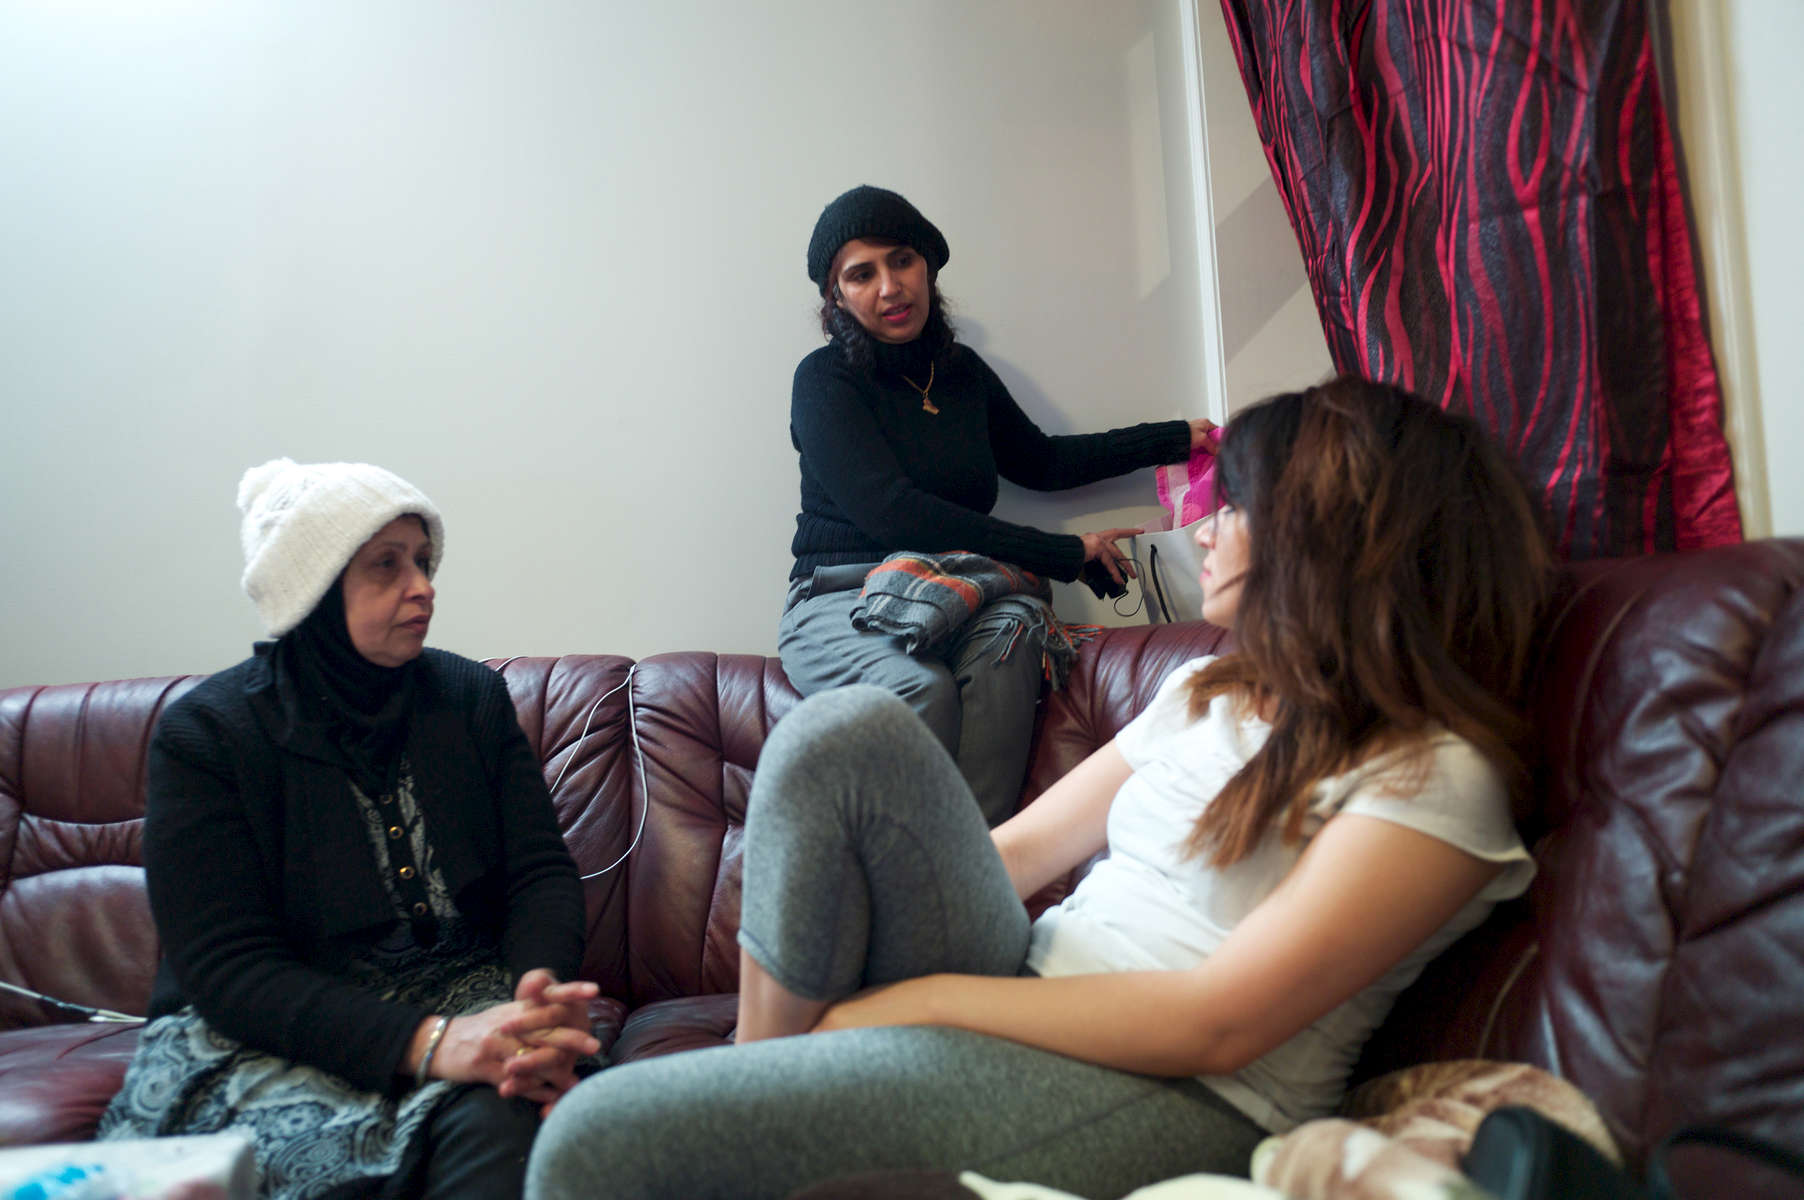 Rejected asylum seeker removes her belongings from behind sofa while seated with two friends.